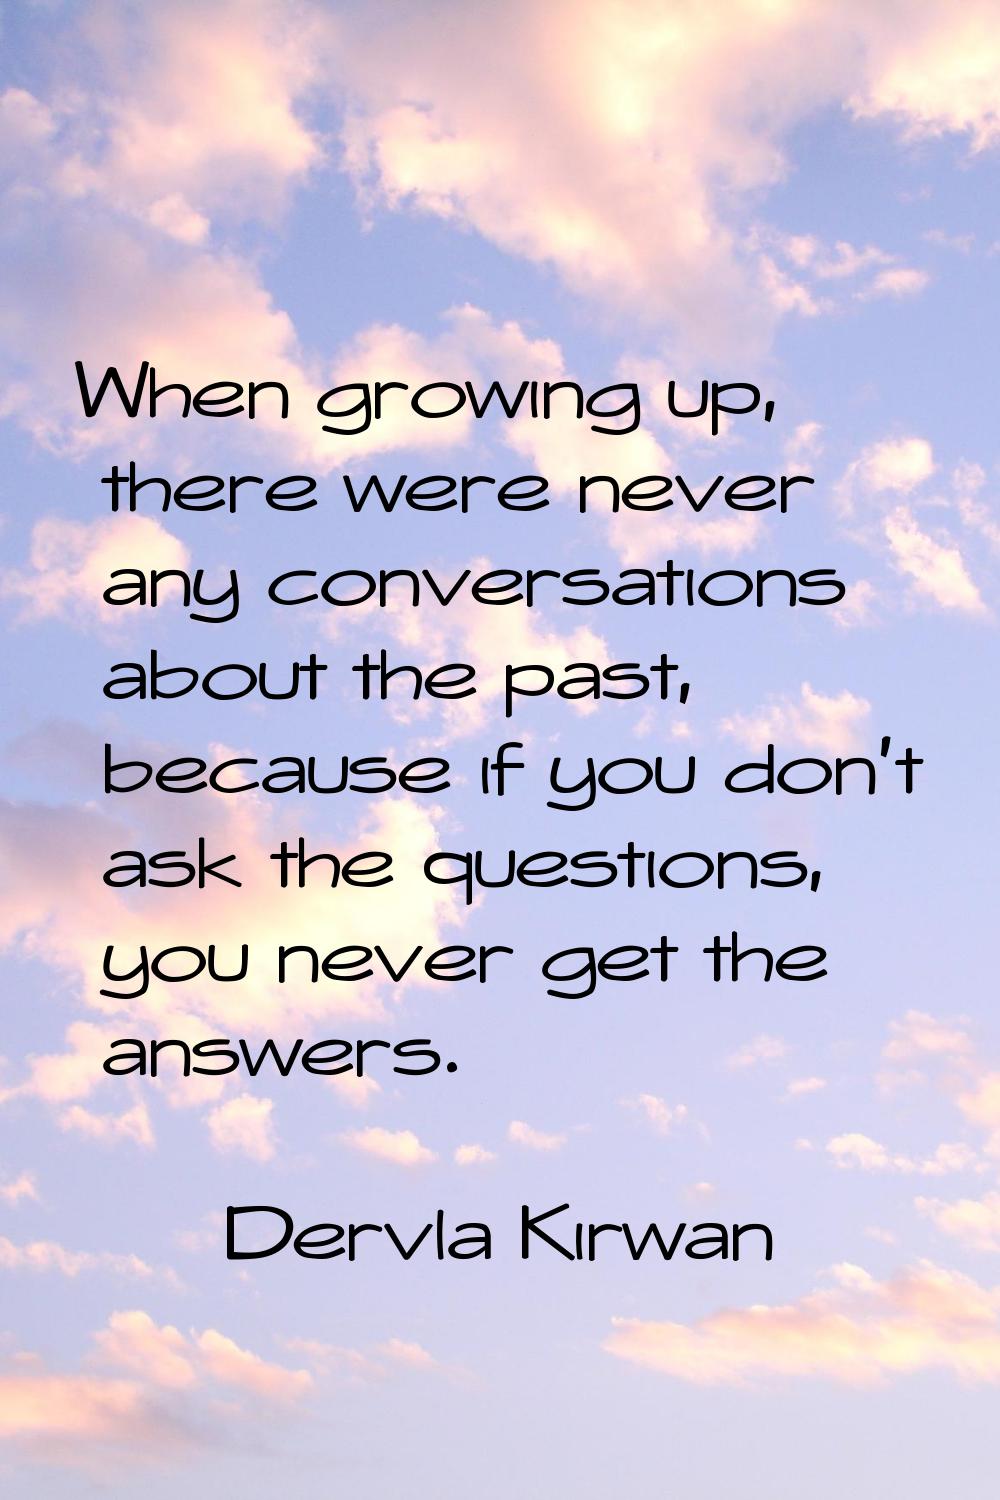 When growing up, there were never any conversations about the past, because if you don't ask the qu